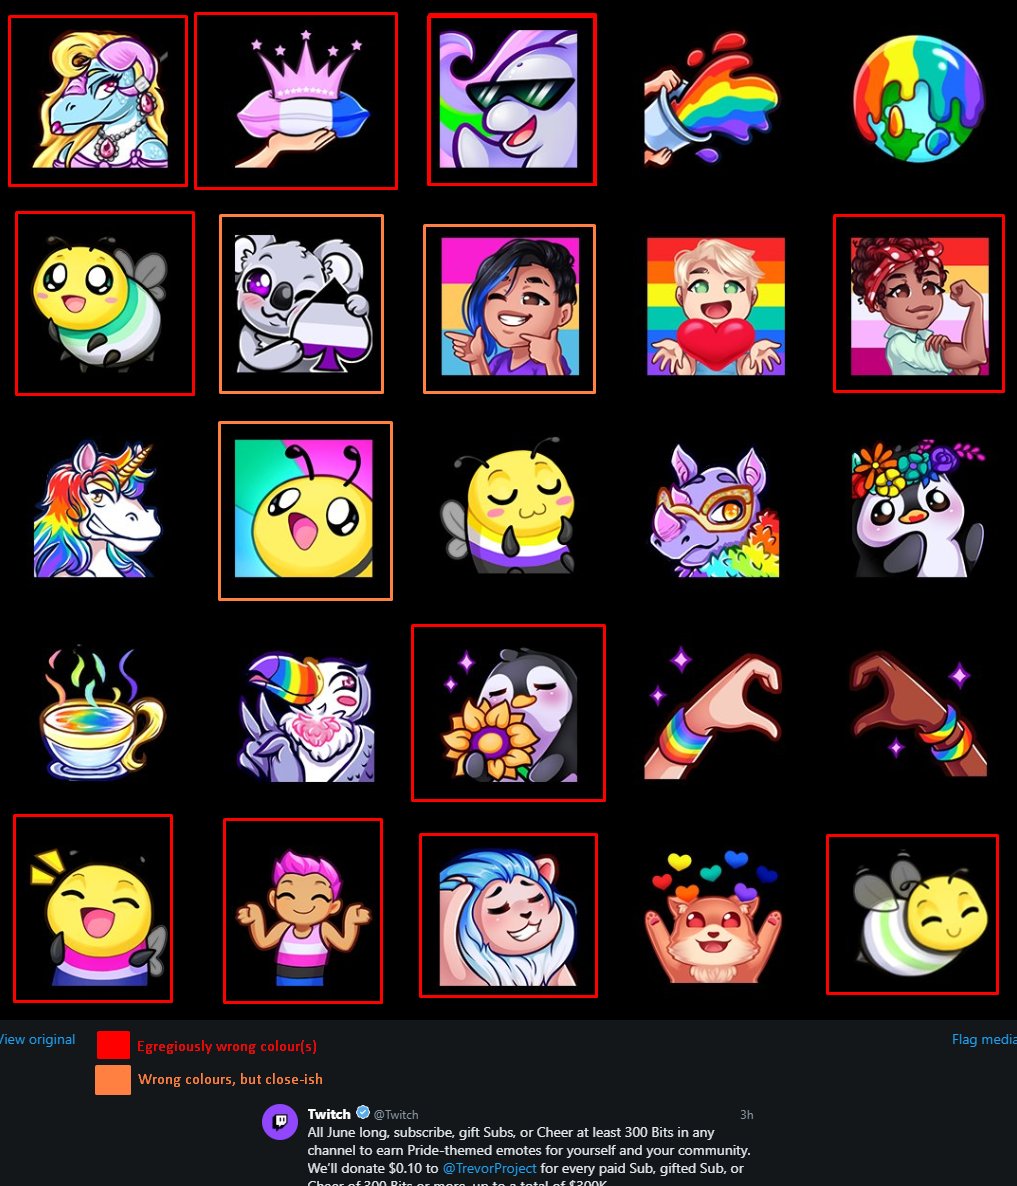 Princess April Acab On Twitter The Colours Of The New Pride Emotes From Twitch Are Just Awful Here They Are With The Actual Flags For Comparison Https T Co Ilr1do1mgy - anastala on twitter roblox has just added new emotes